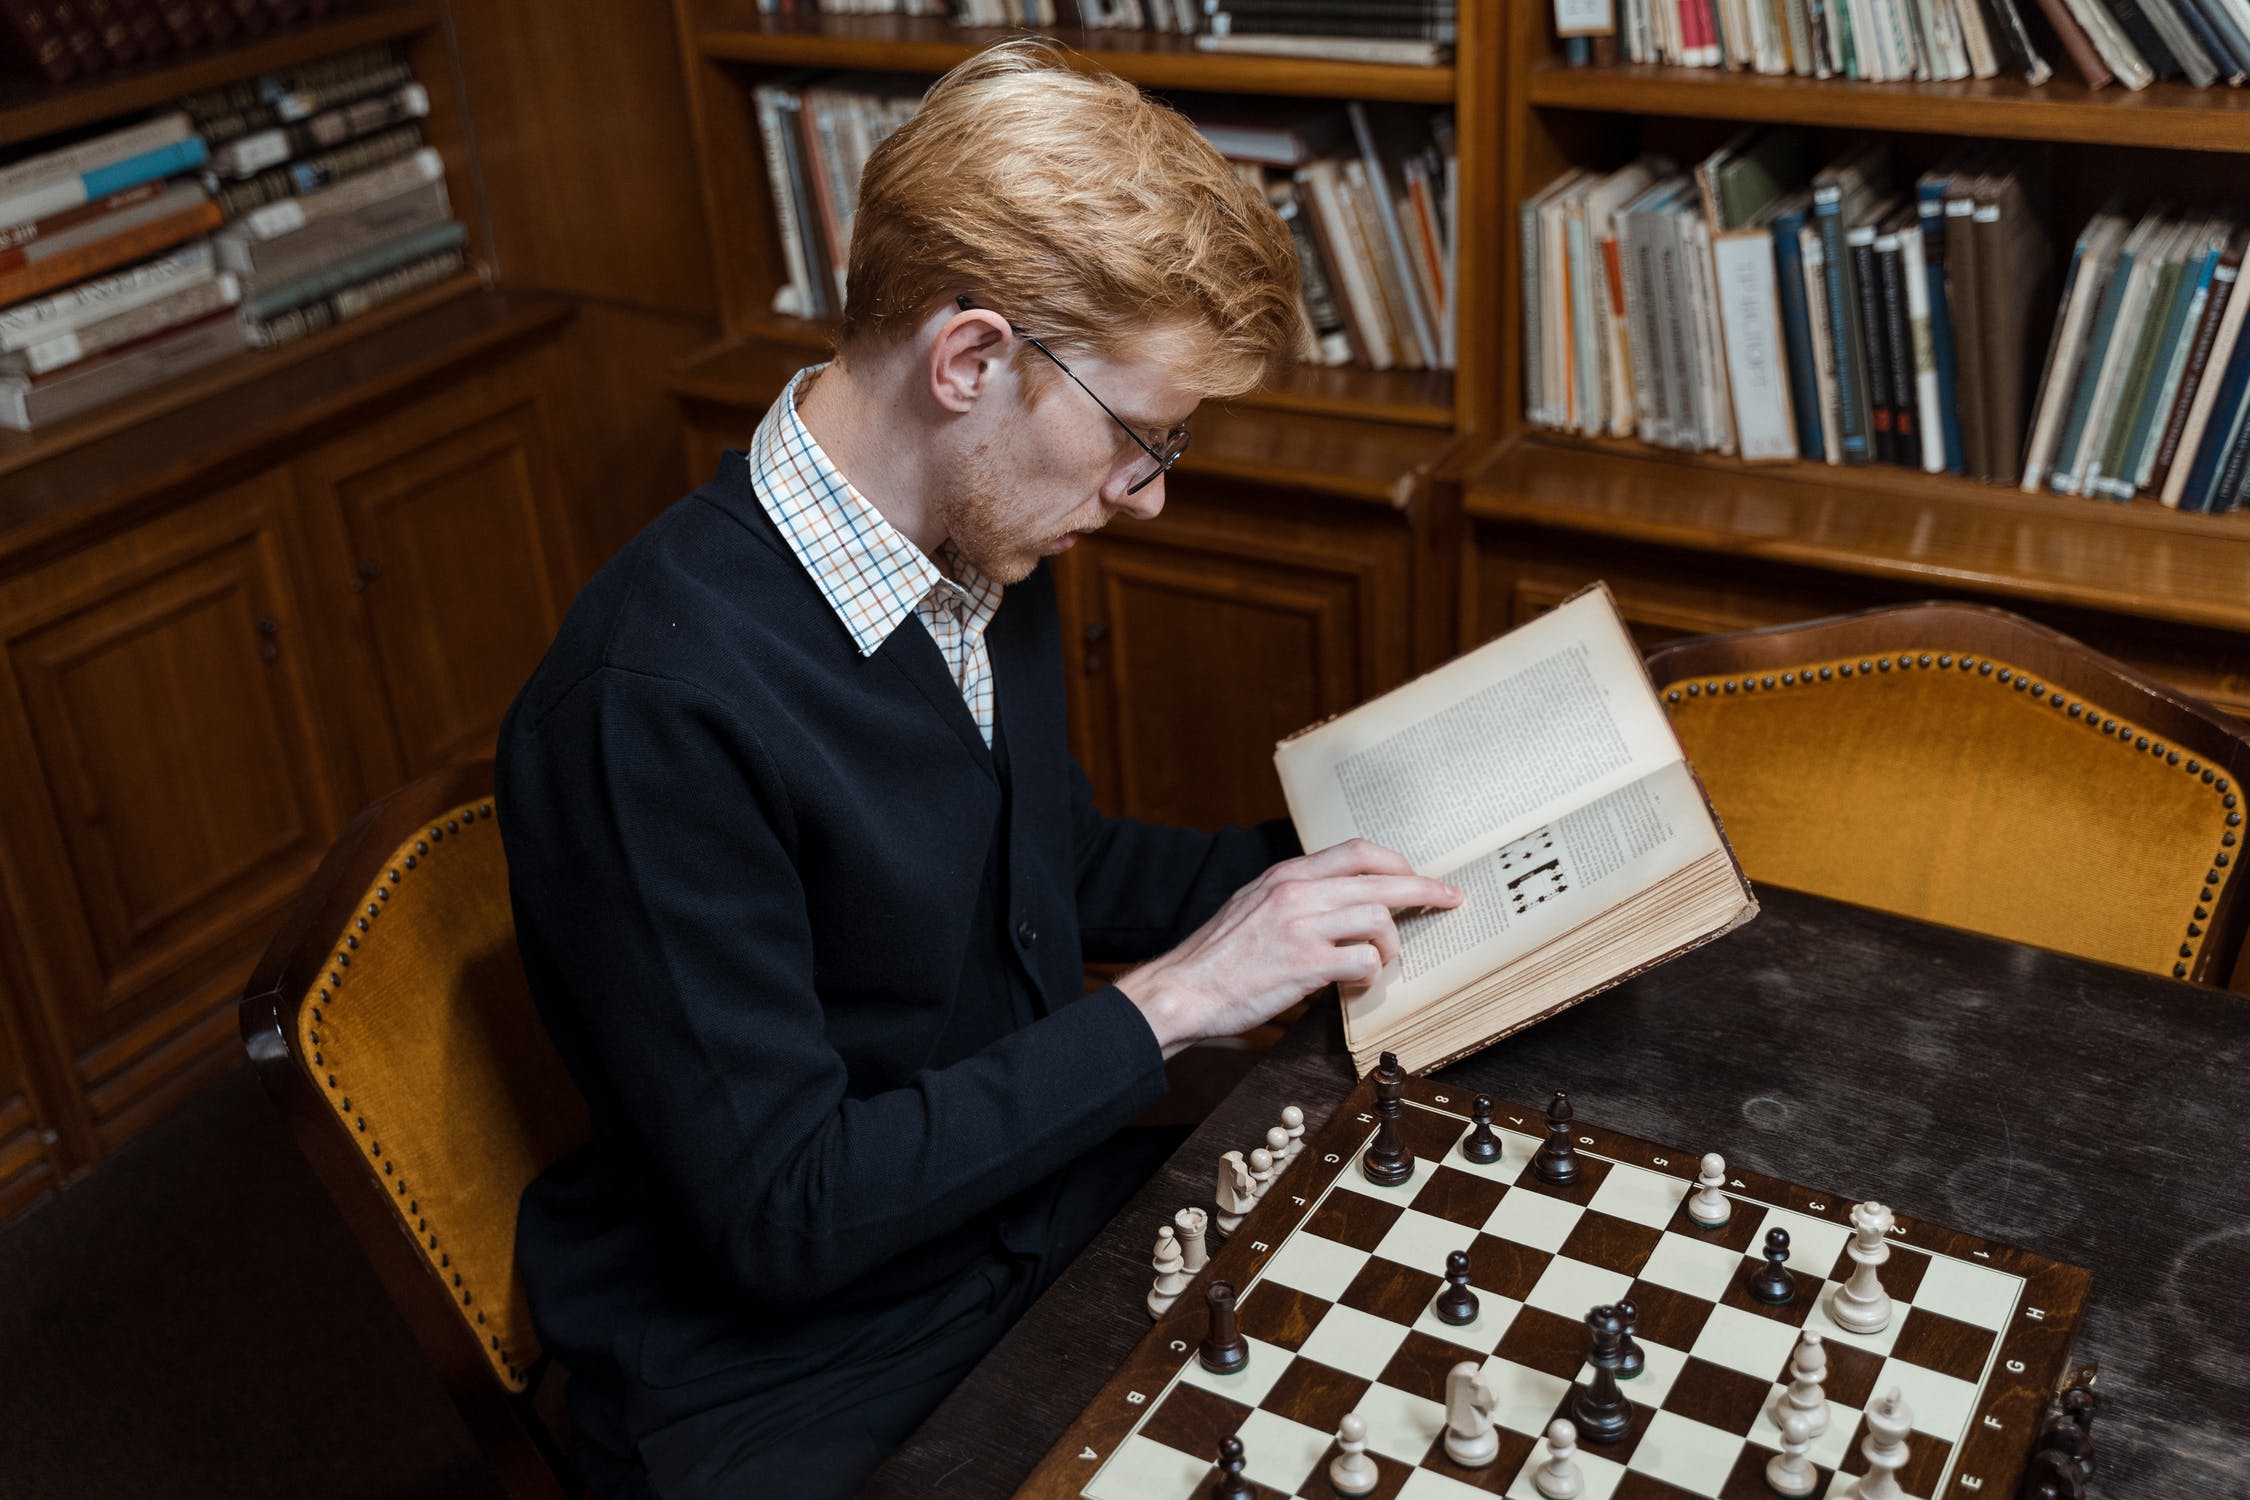 What is a good book for learning chess strategies? - Quora